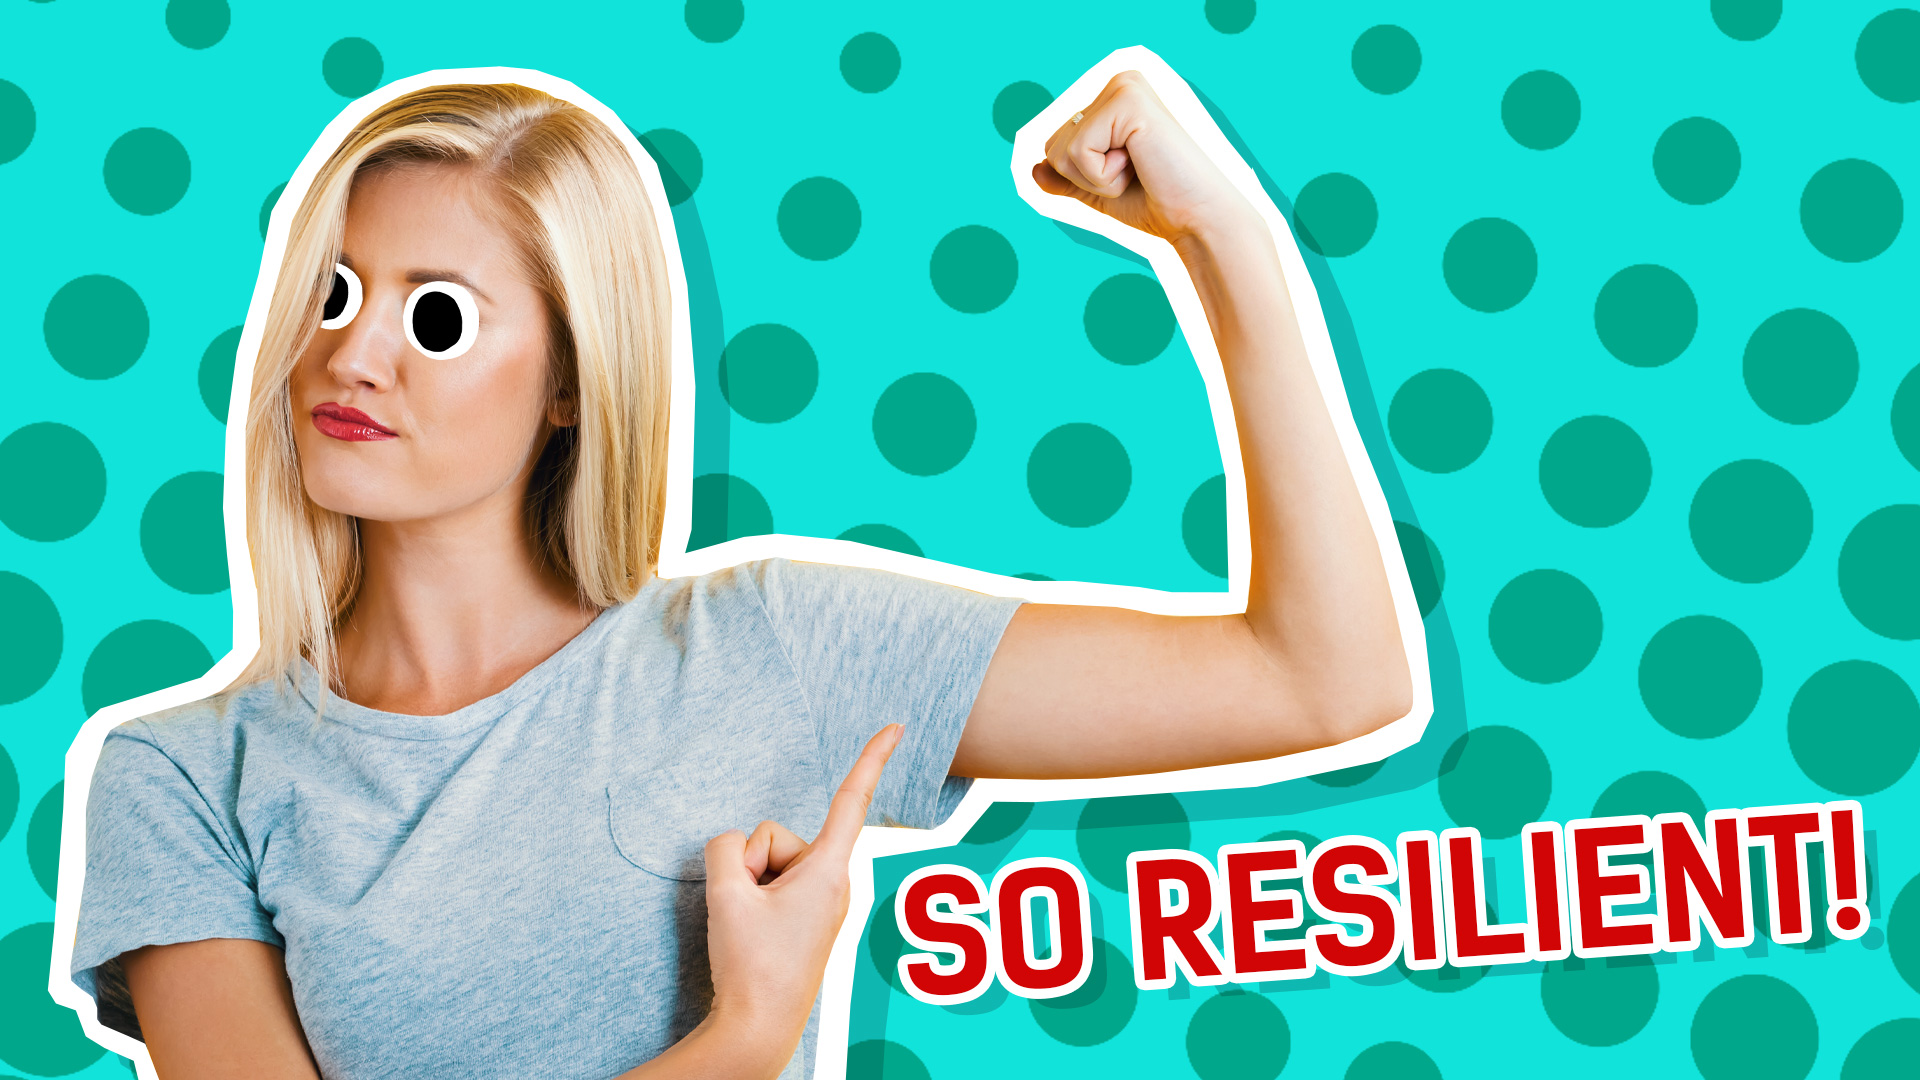 Result: So resilient